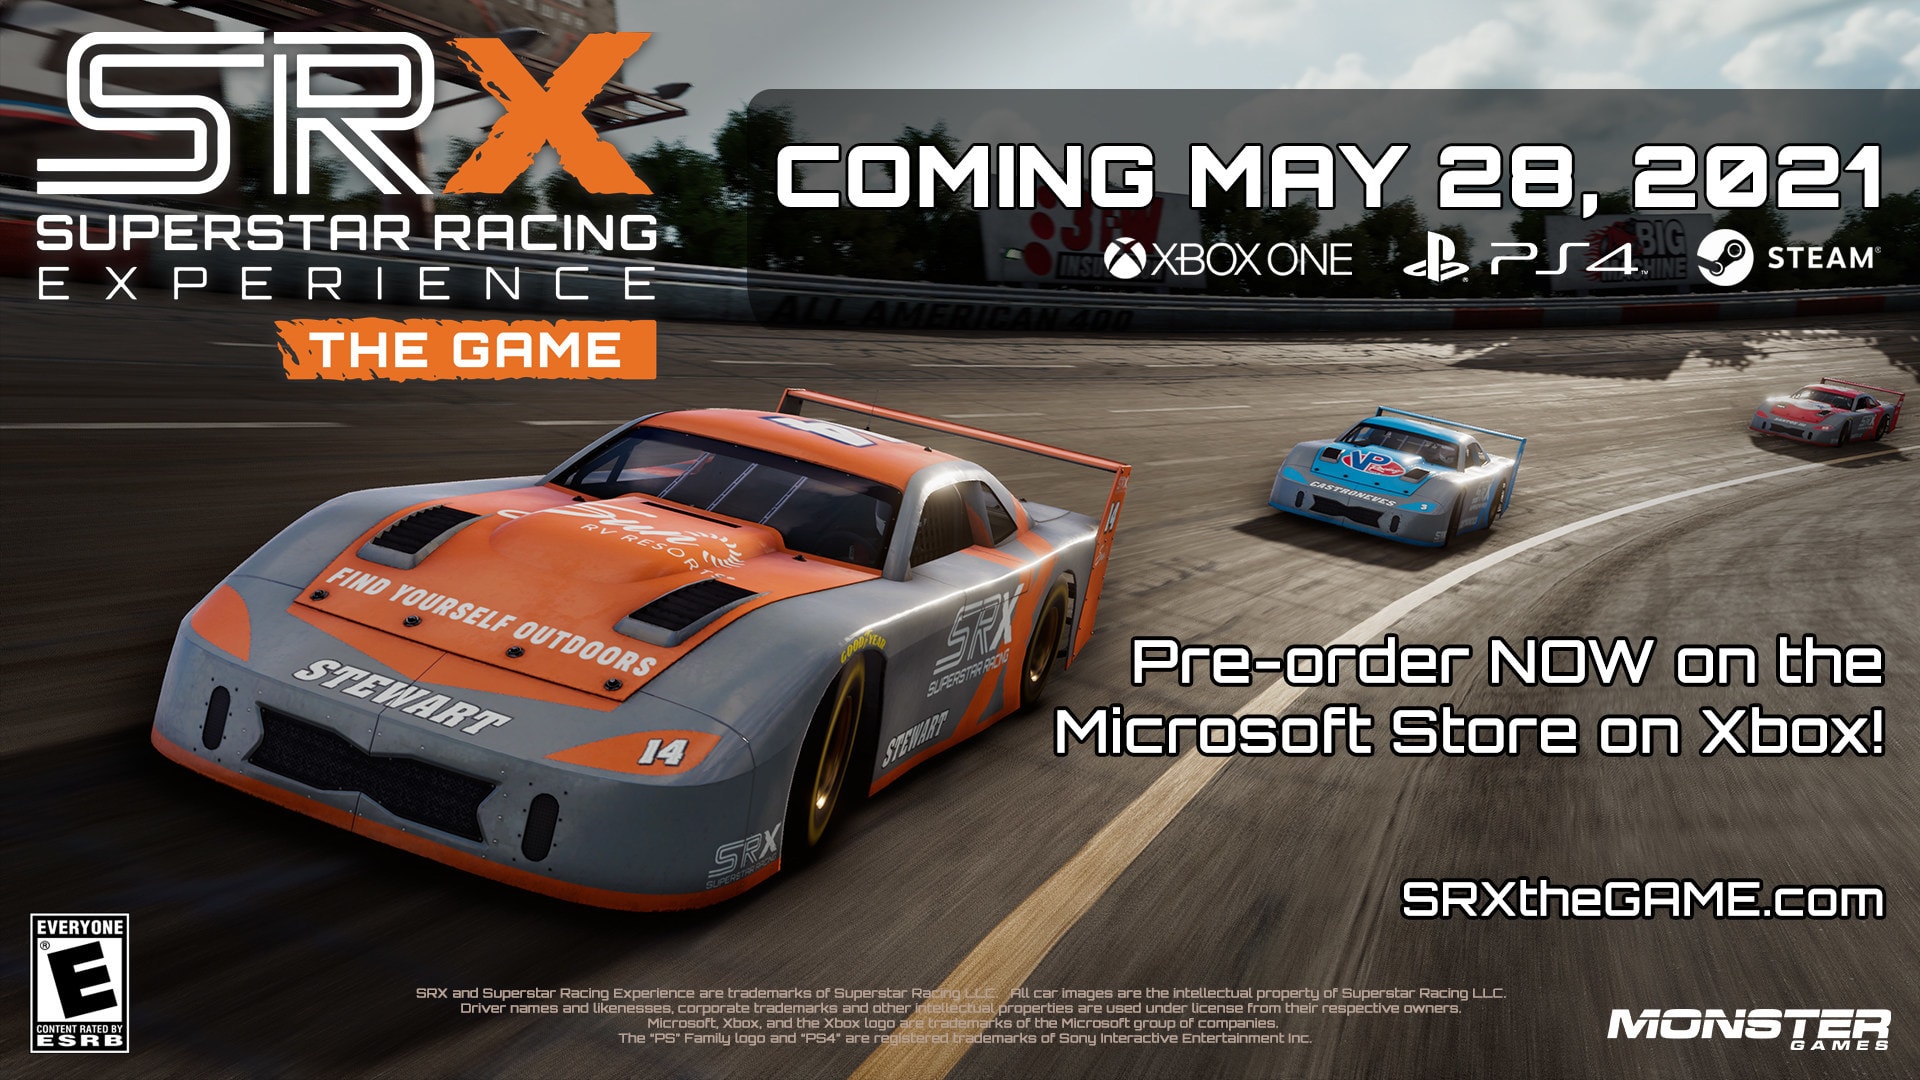 New Game Brings the Superstar Racing Experience to PC, Xbox, and PlayStation